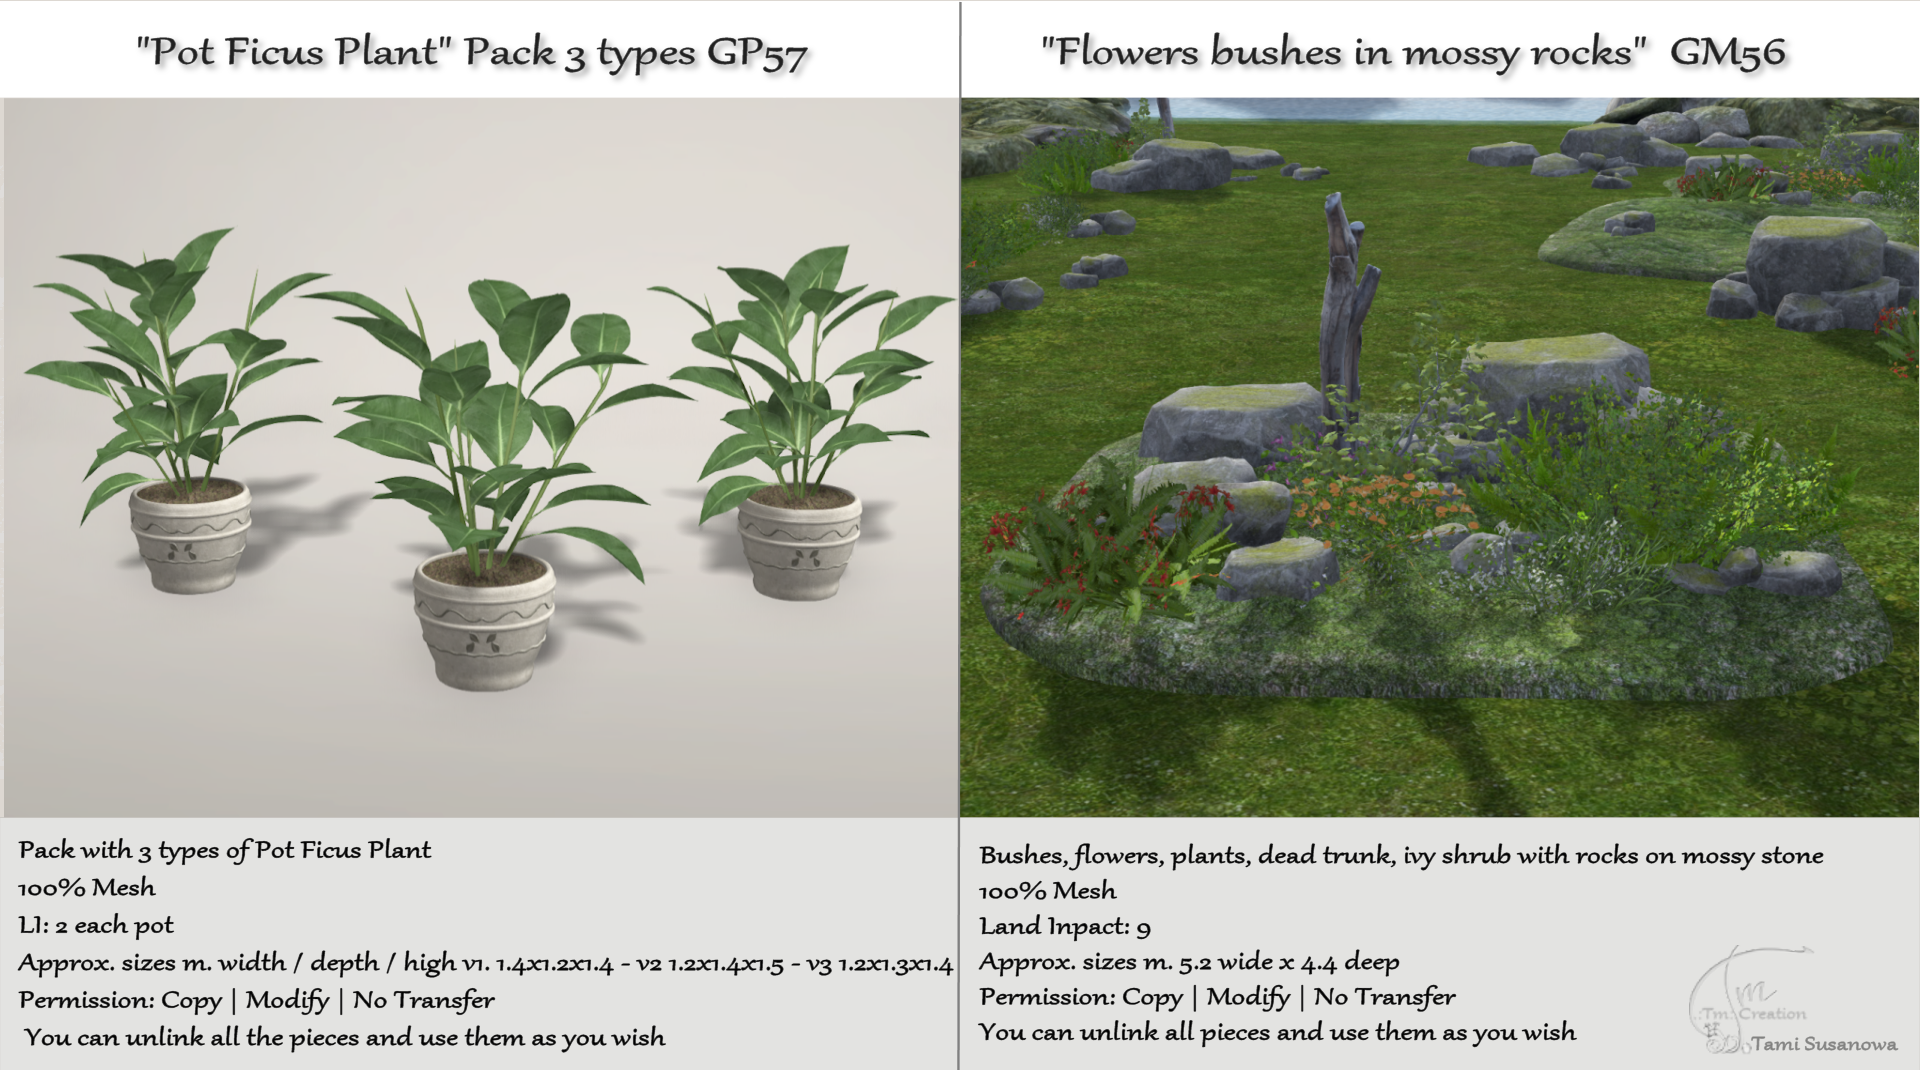 Tm Creation – Pot Ficus Plant Pack & Flower Bushes In Mossy Rocks